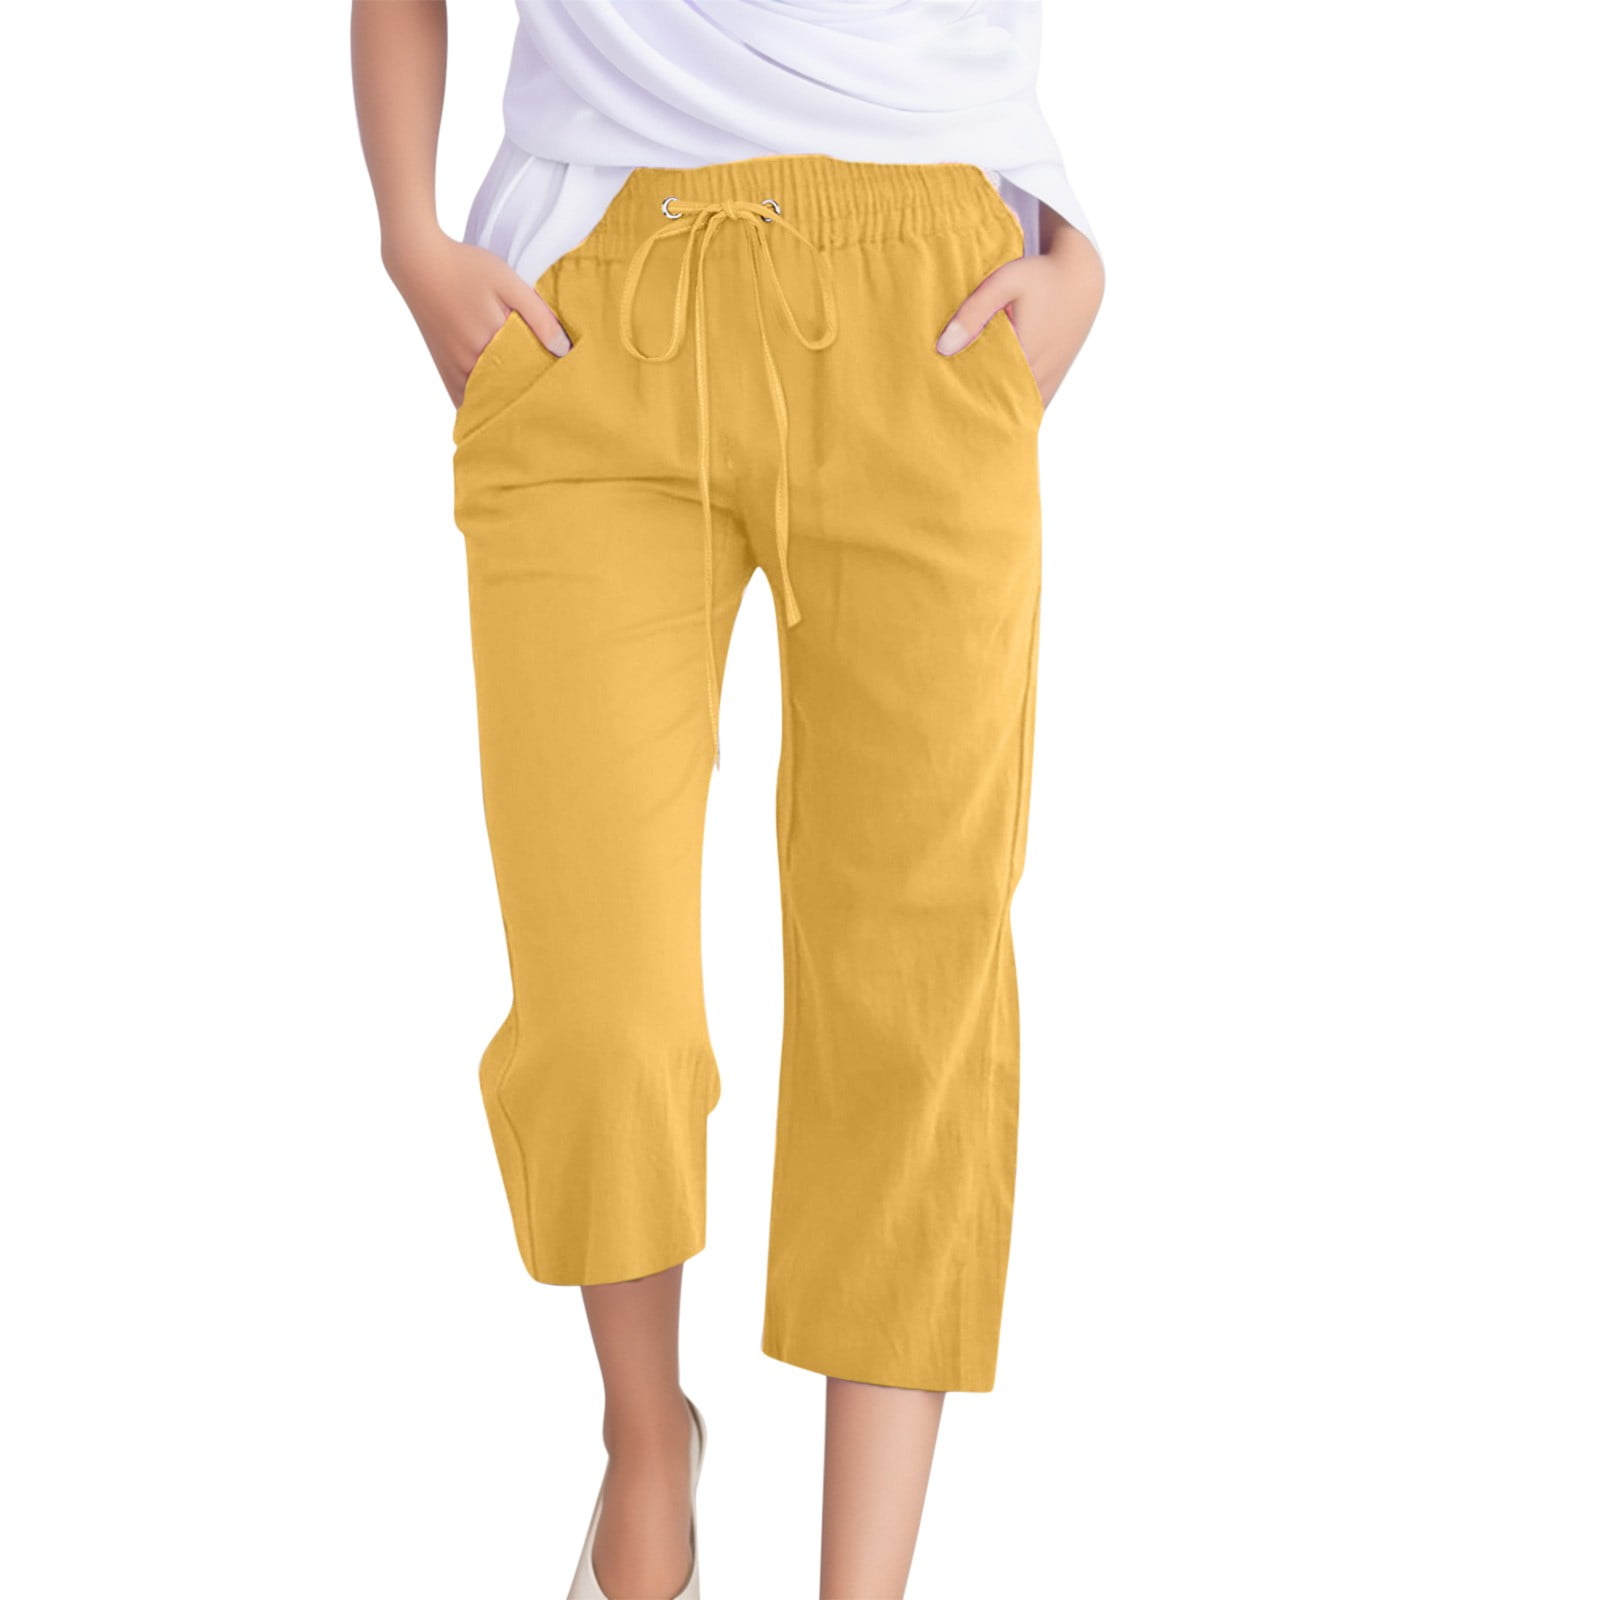 Capri Leggings with Pockets for Women Comfort High Waisted Cropped ...